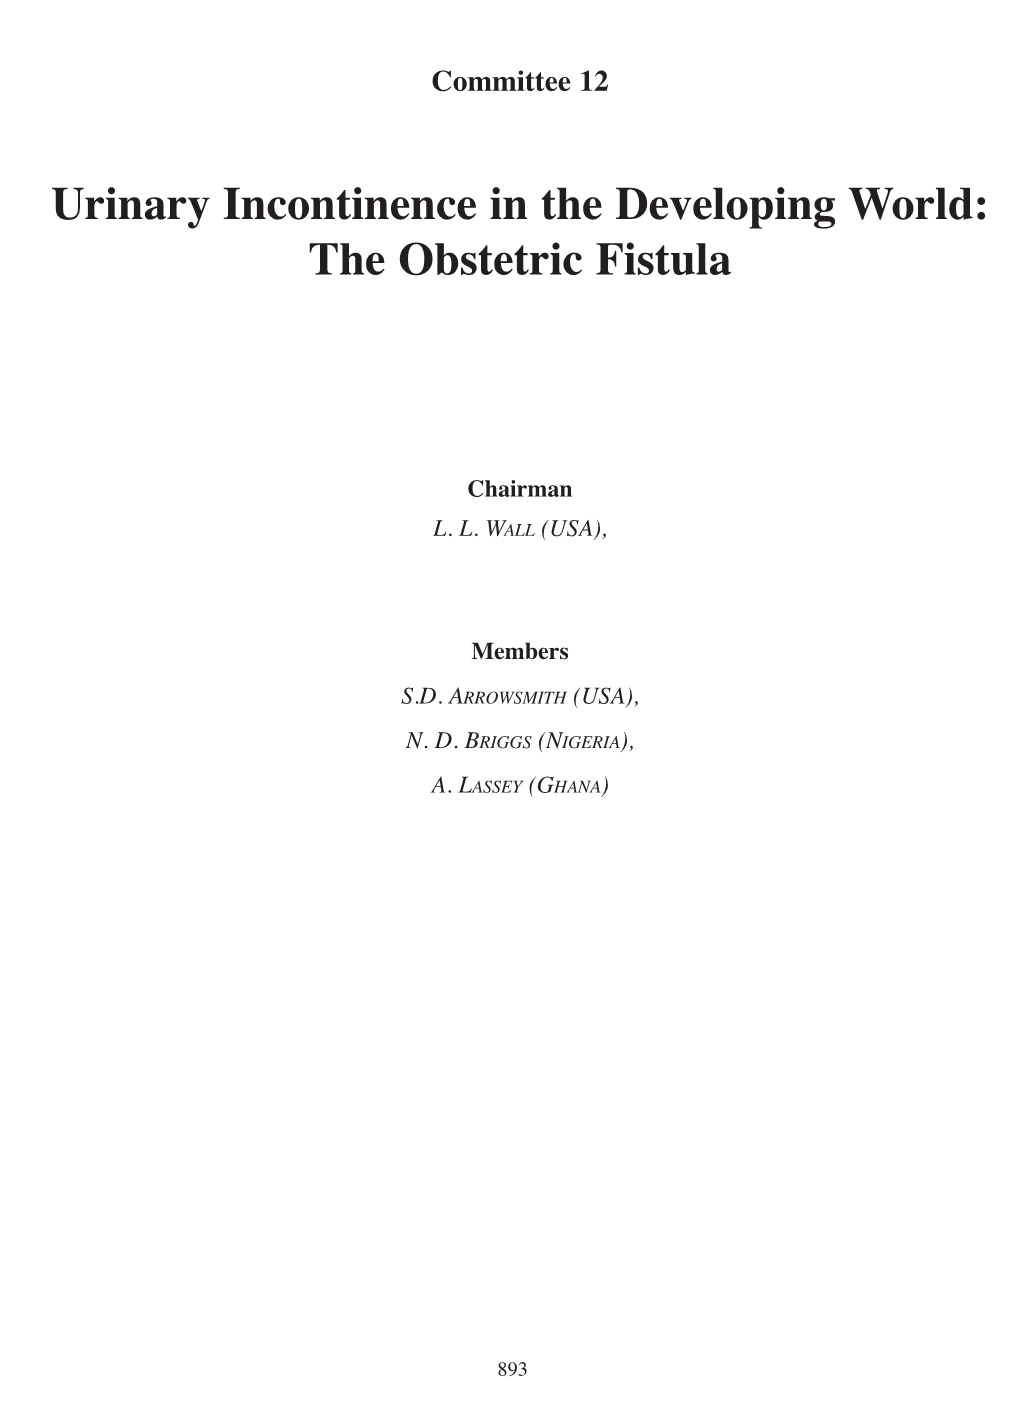 Urinary Incontinence in the Developing World: the Obstetric Fistula